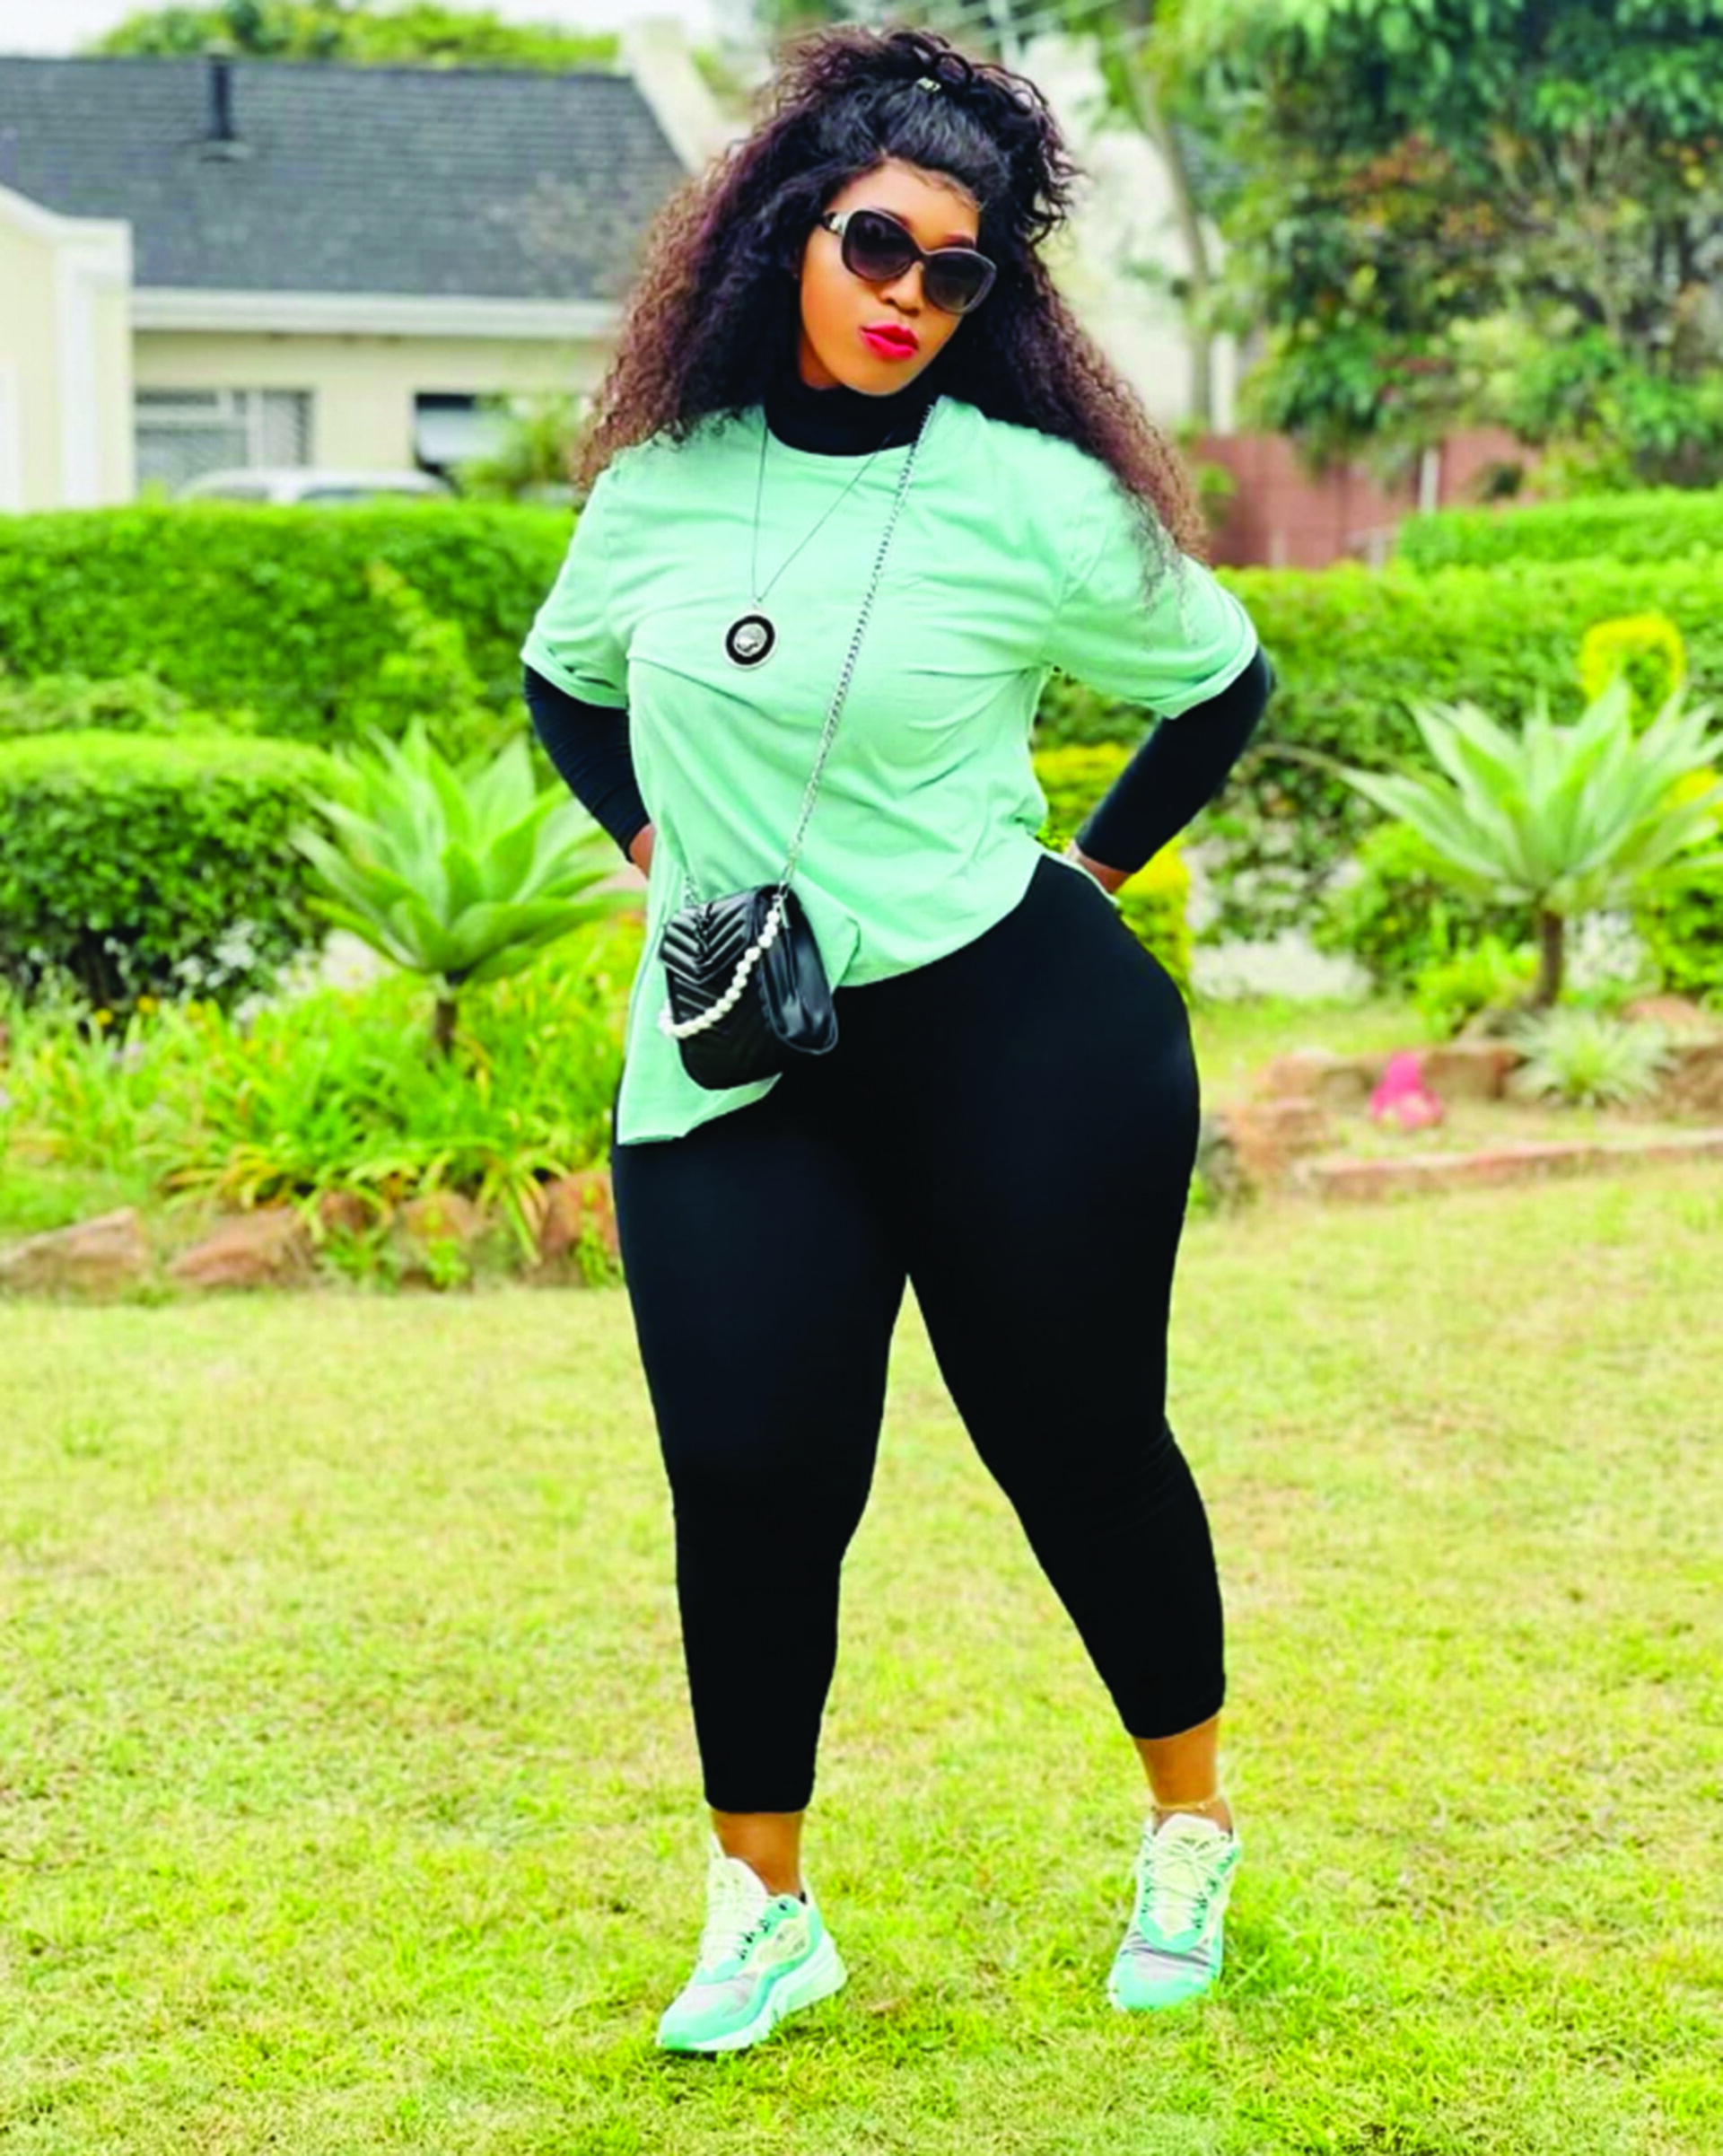 Miss Curvy Africa bounces back - The Southern Eye